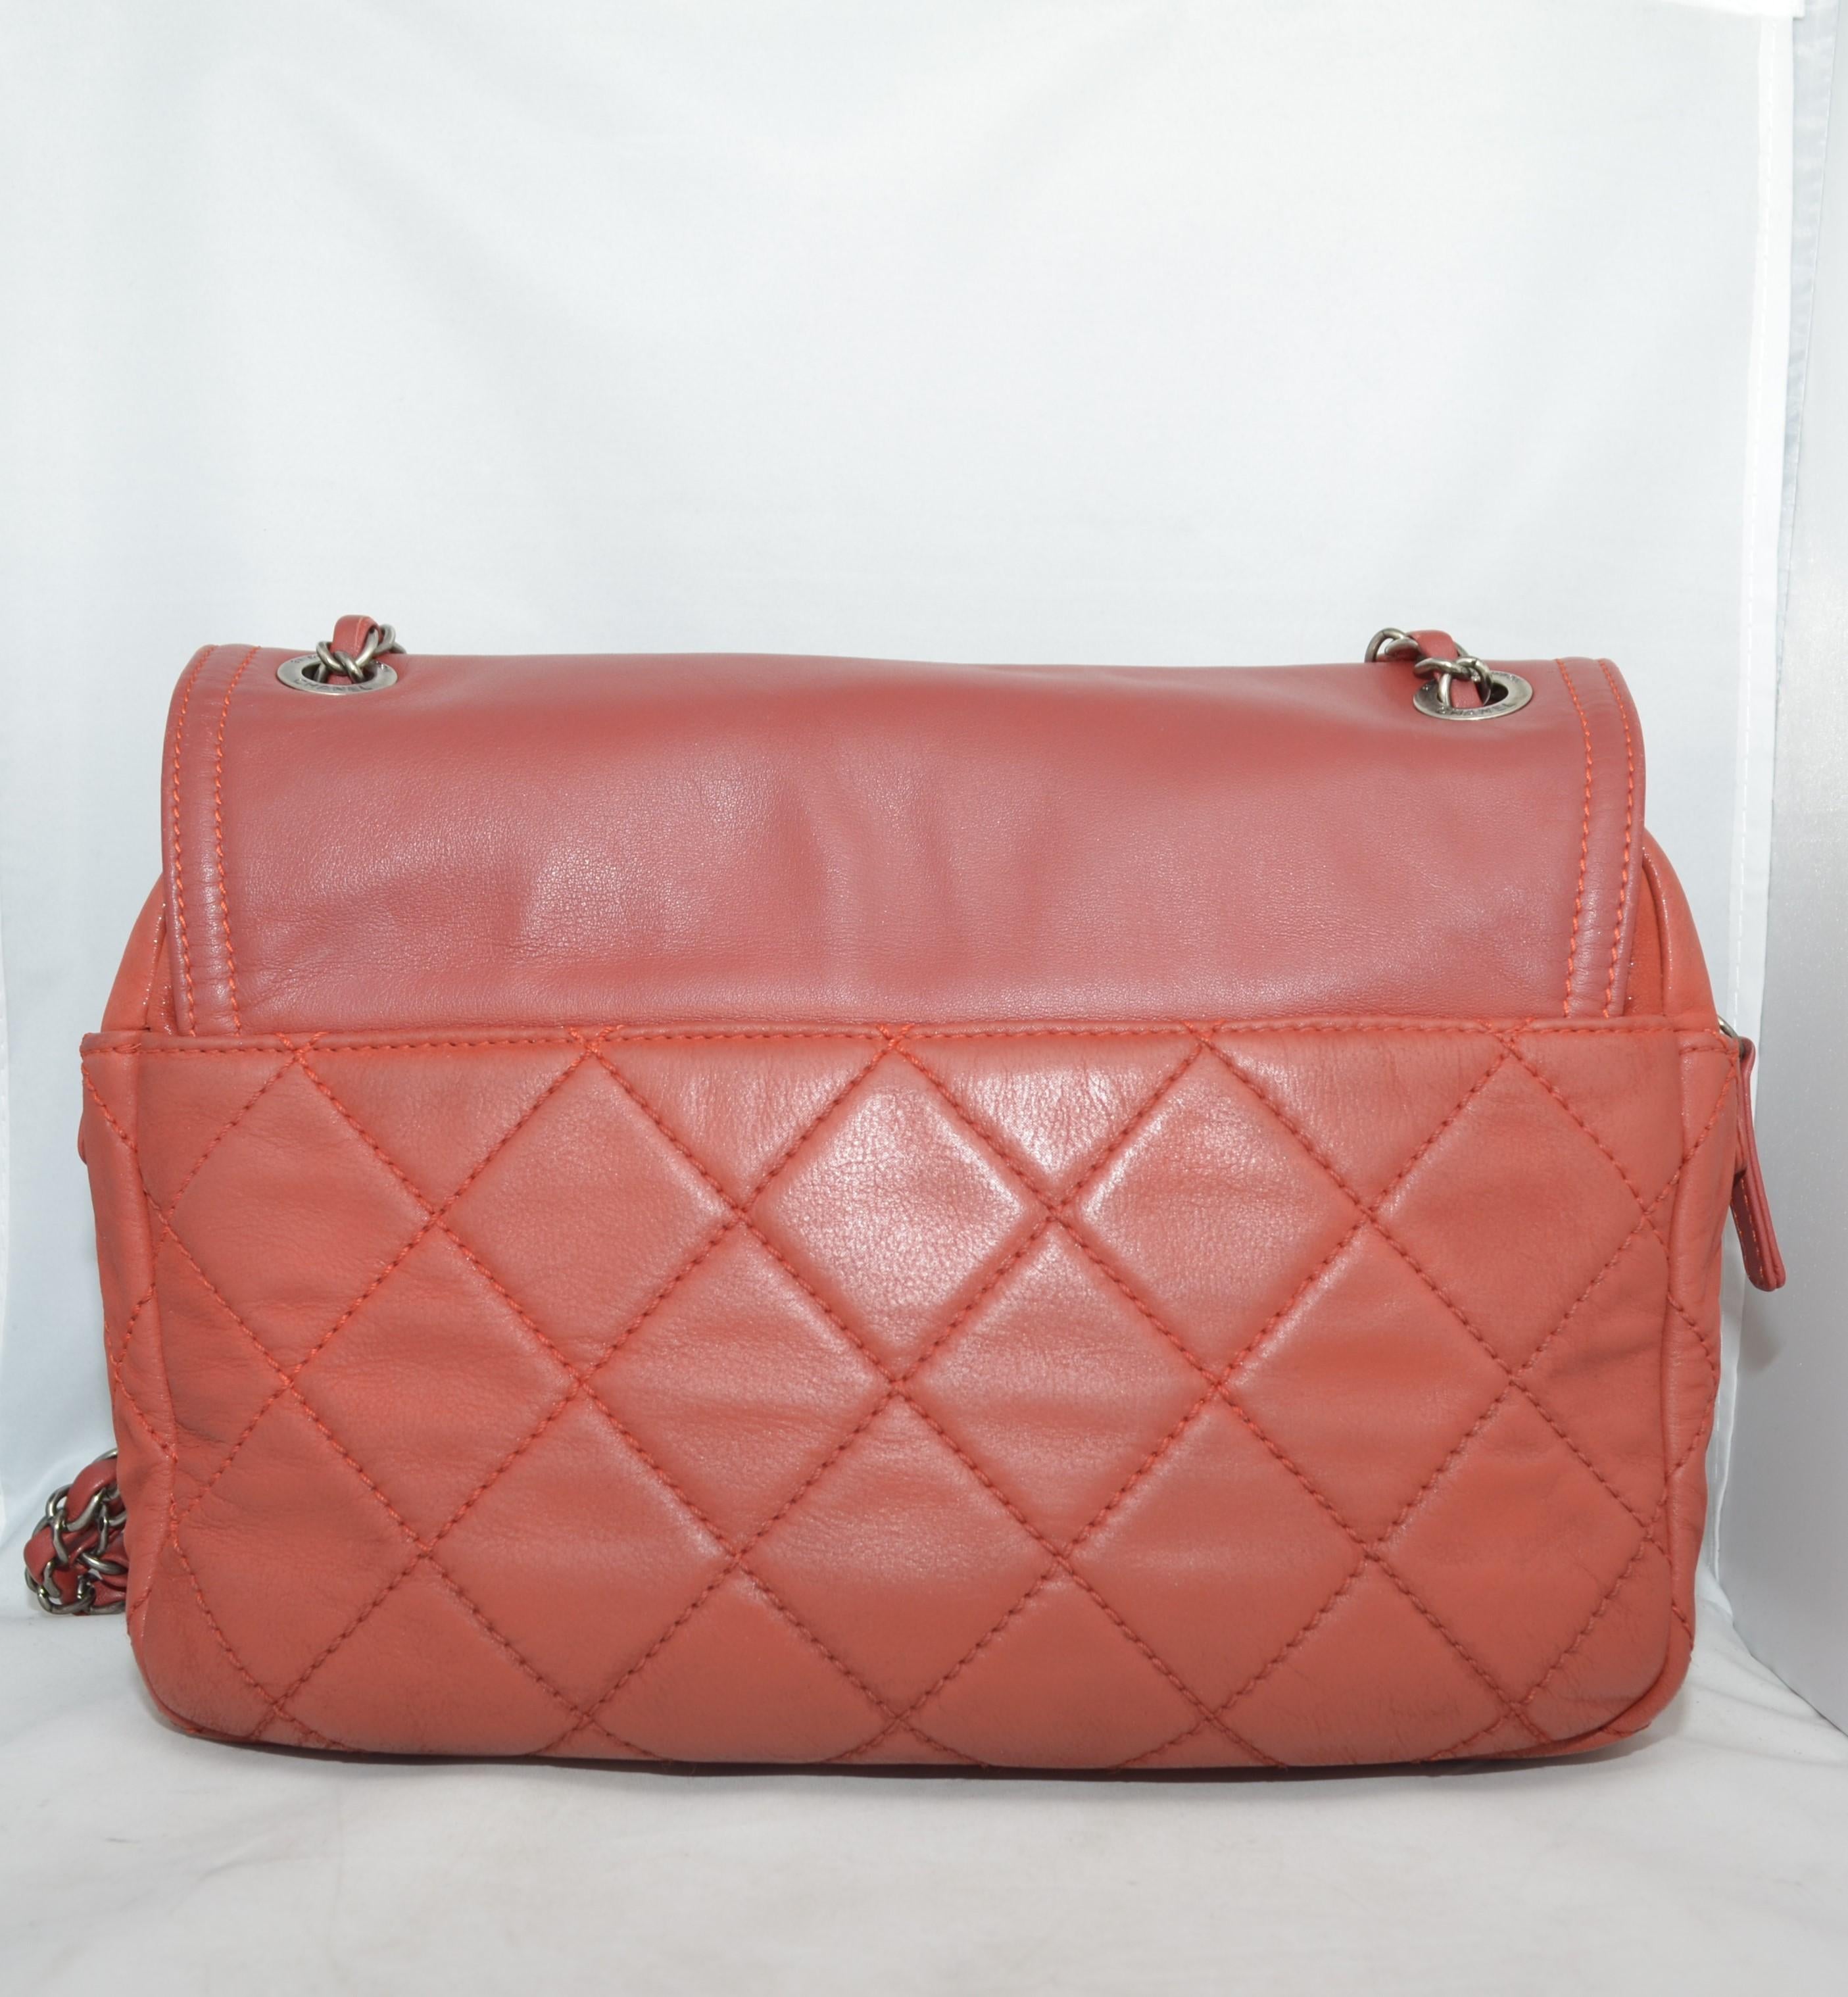 2011-2012 Chanel Quilted Reissue Shoulder Bag In Excellent Condition In Carmel, CA